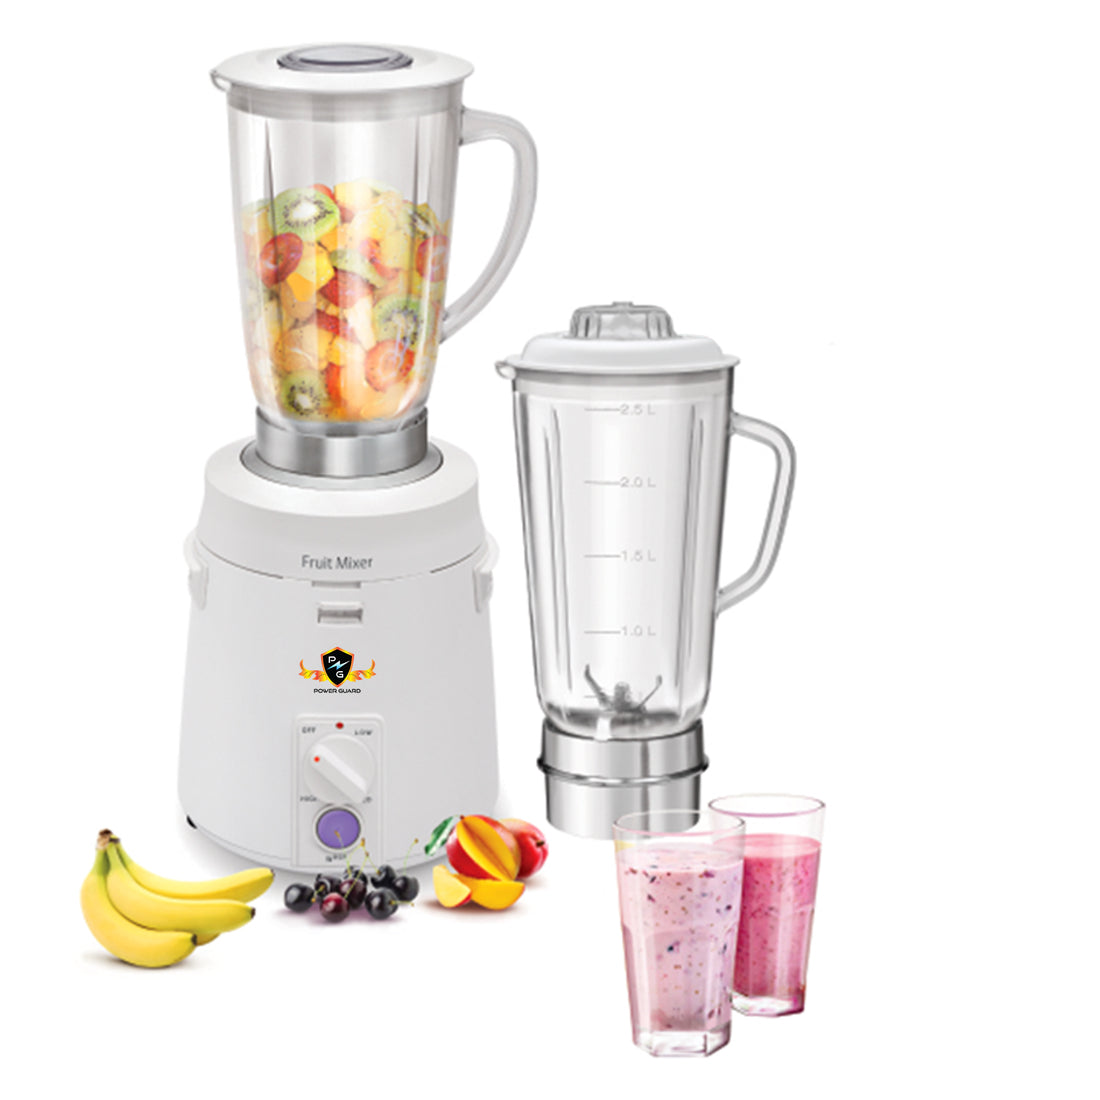 Find the Best Blender Mixer Price: Compare and Save on Top Brands